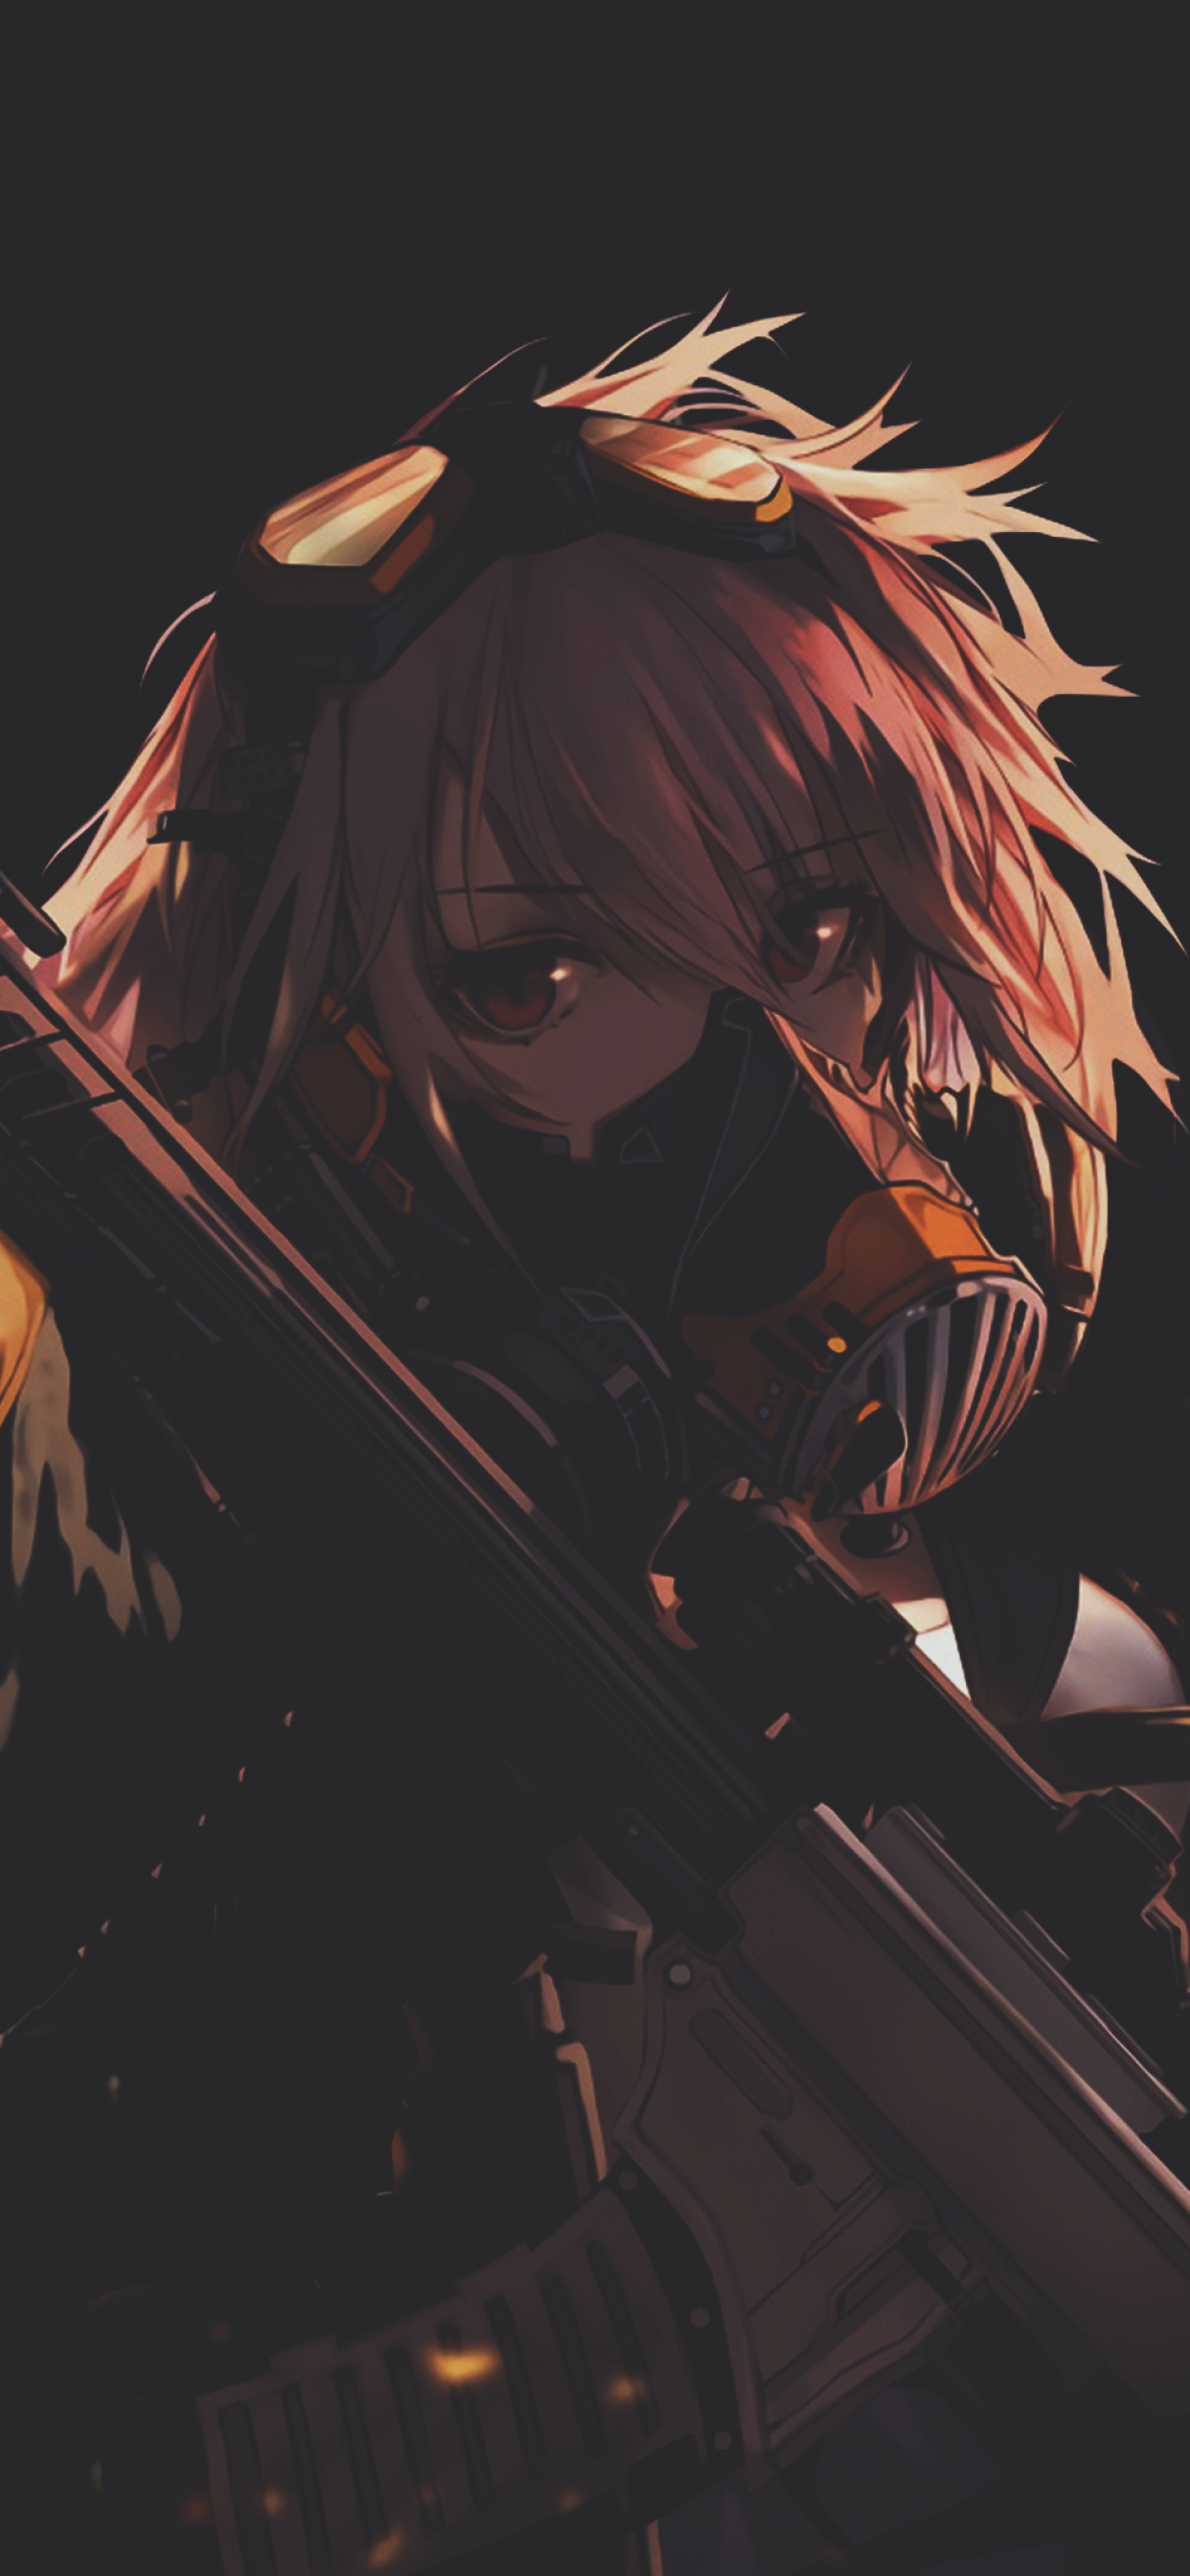 Download 1242x2688 Anime Girl, Dark, Gas Mask, Short Hair Wallpaper for iPhone XS Max